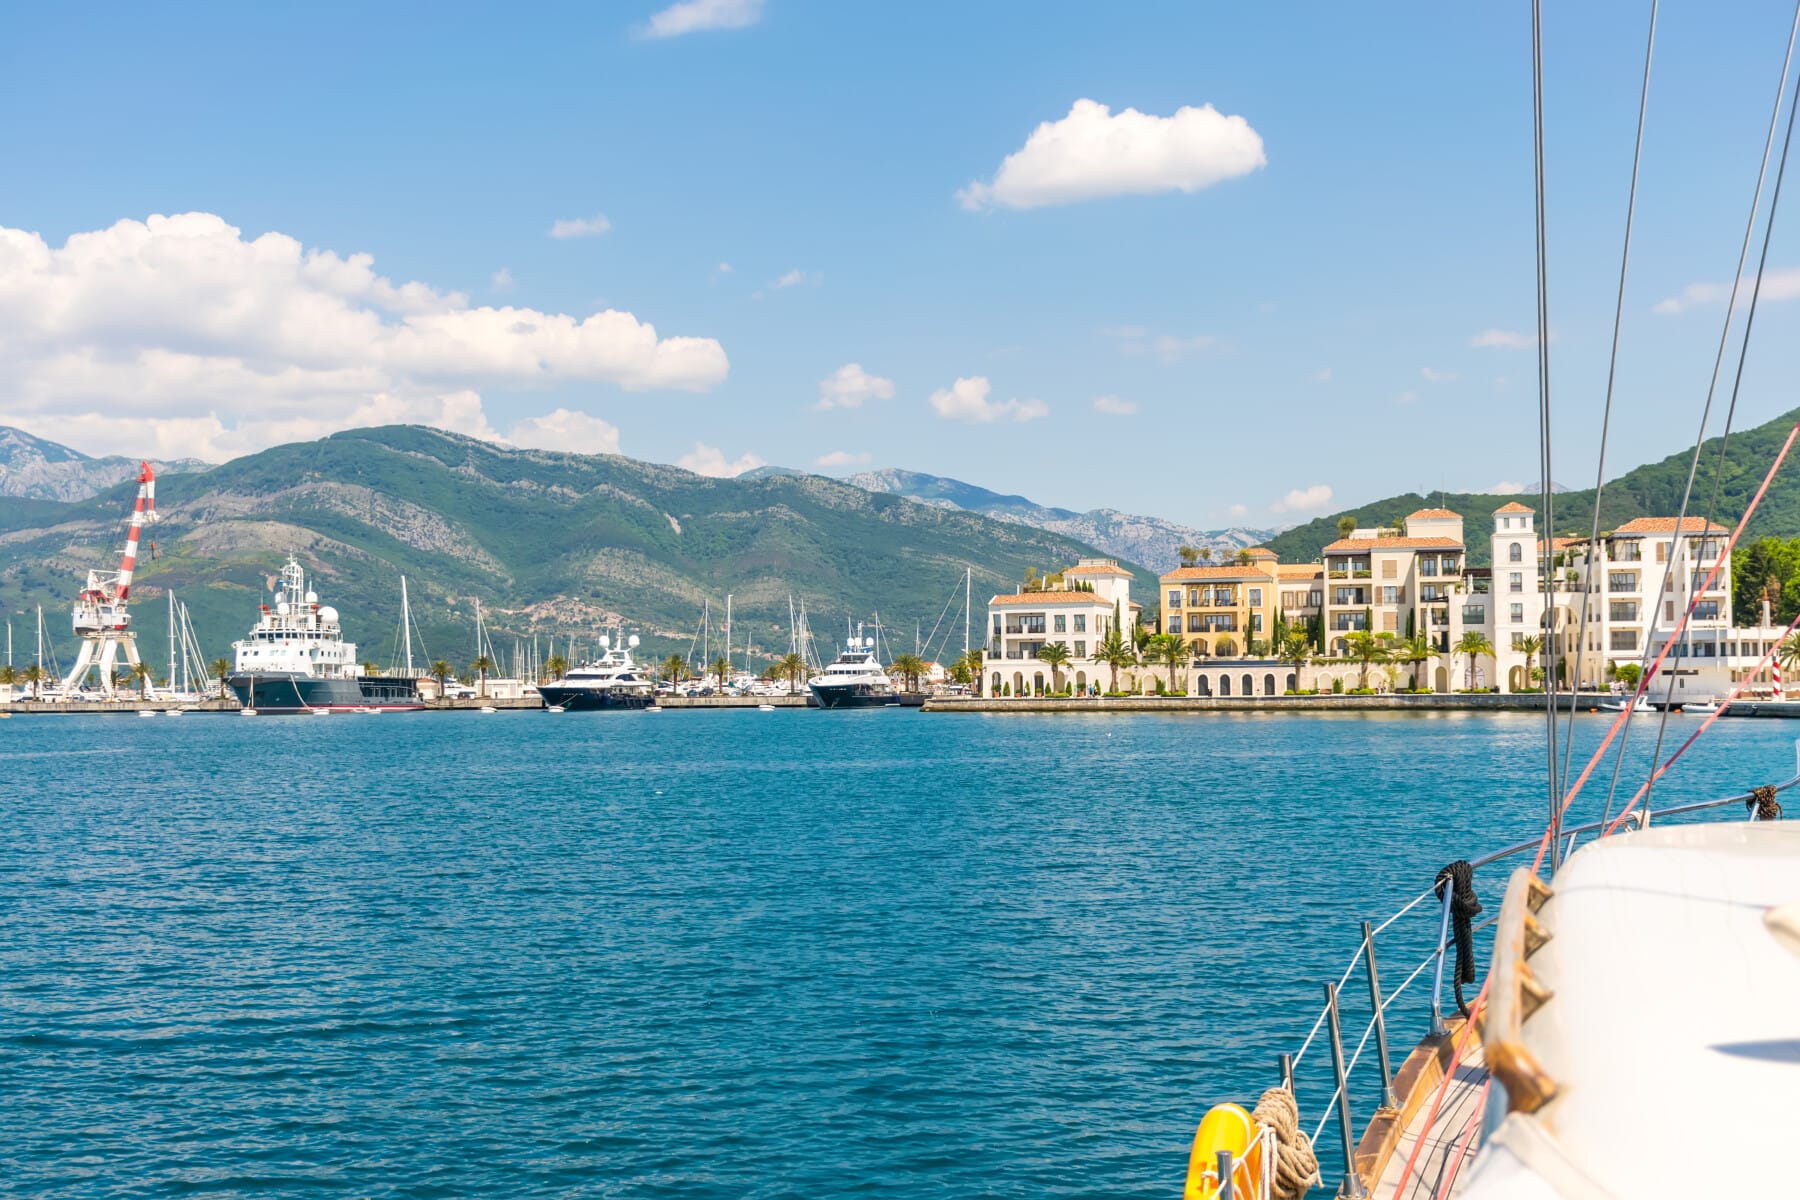 yachts of various sizes and large vessels moored in the port of Tivat.